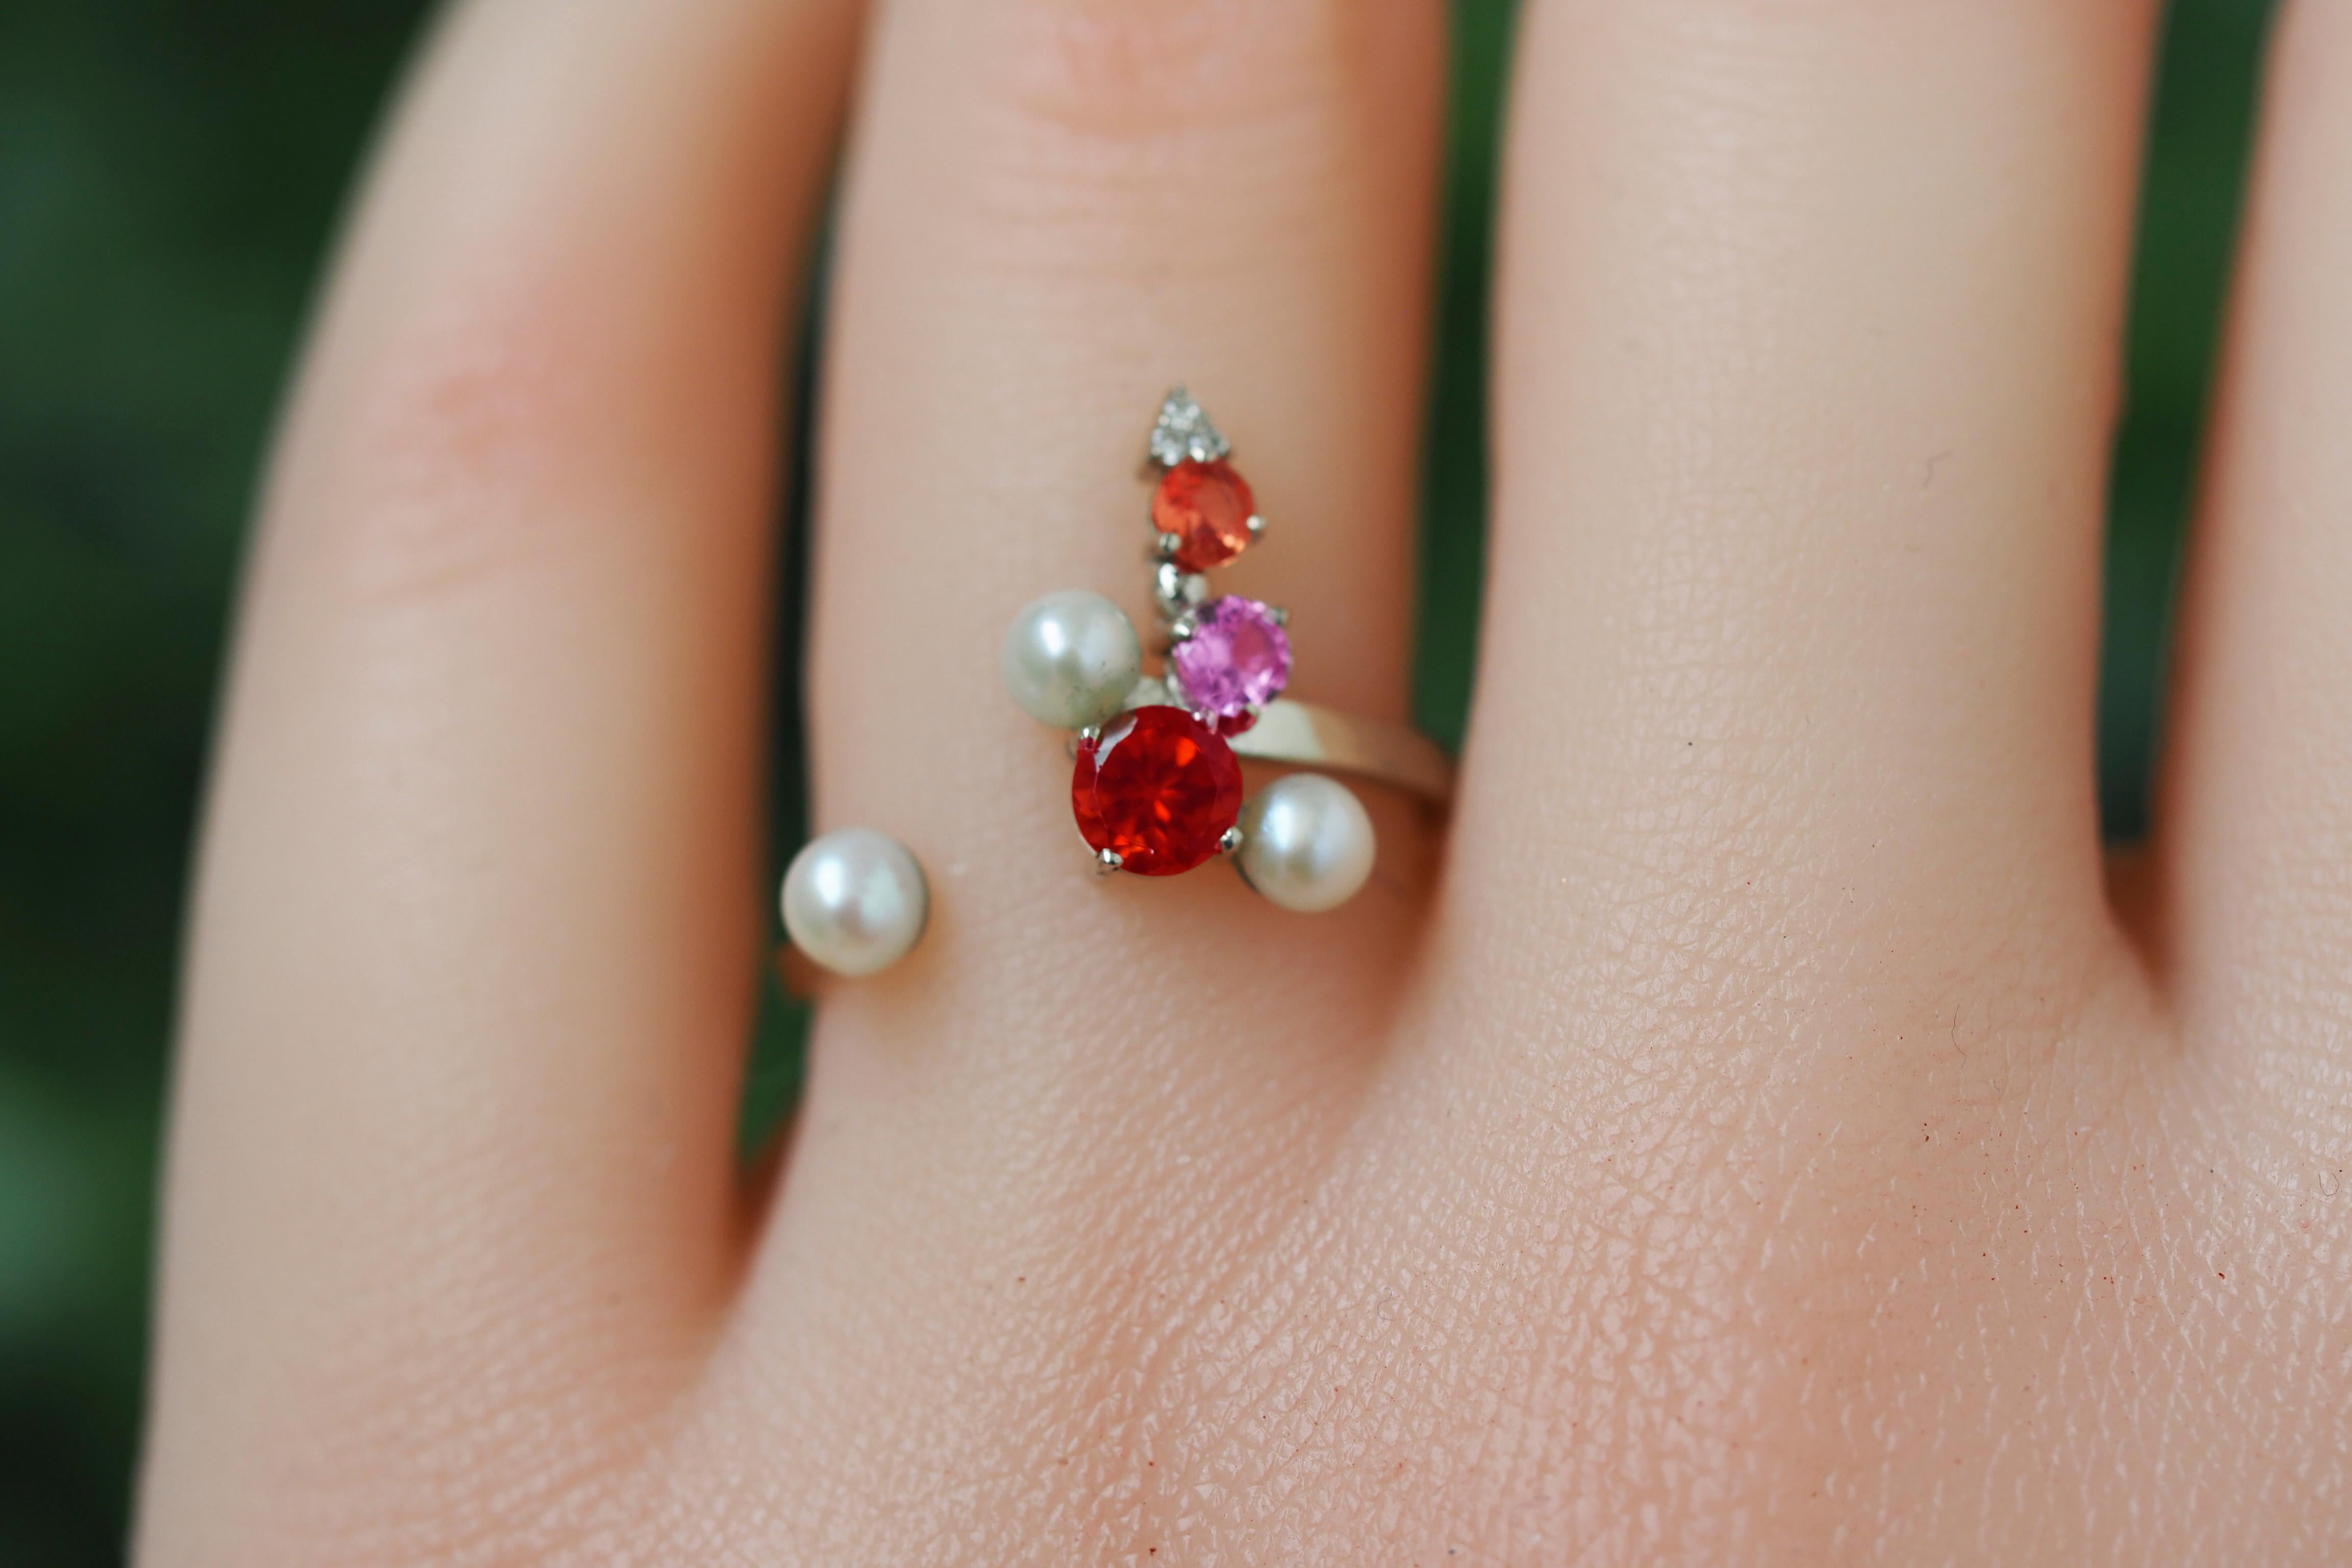 For Sale:   Ruby and multicolored gemstones ring in 14k gold! 3